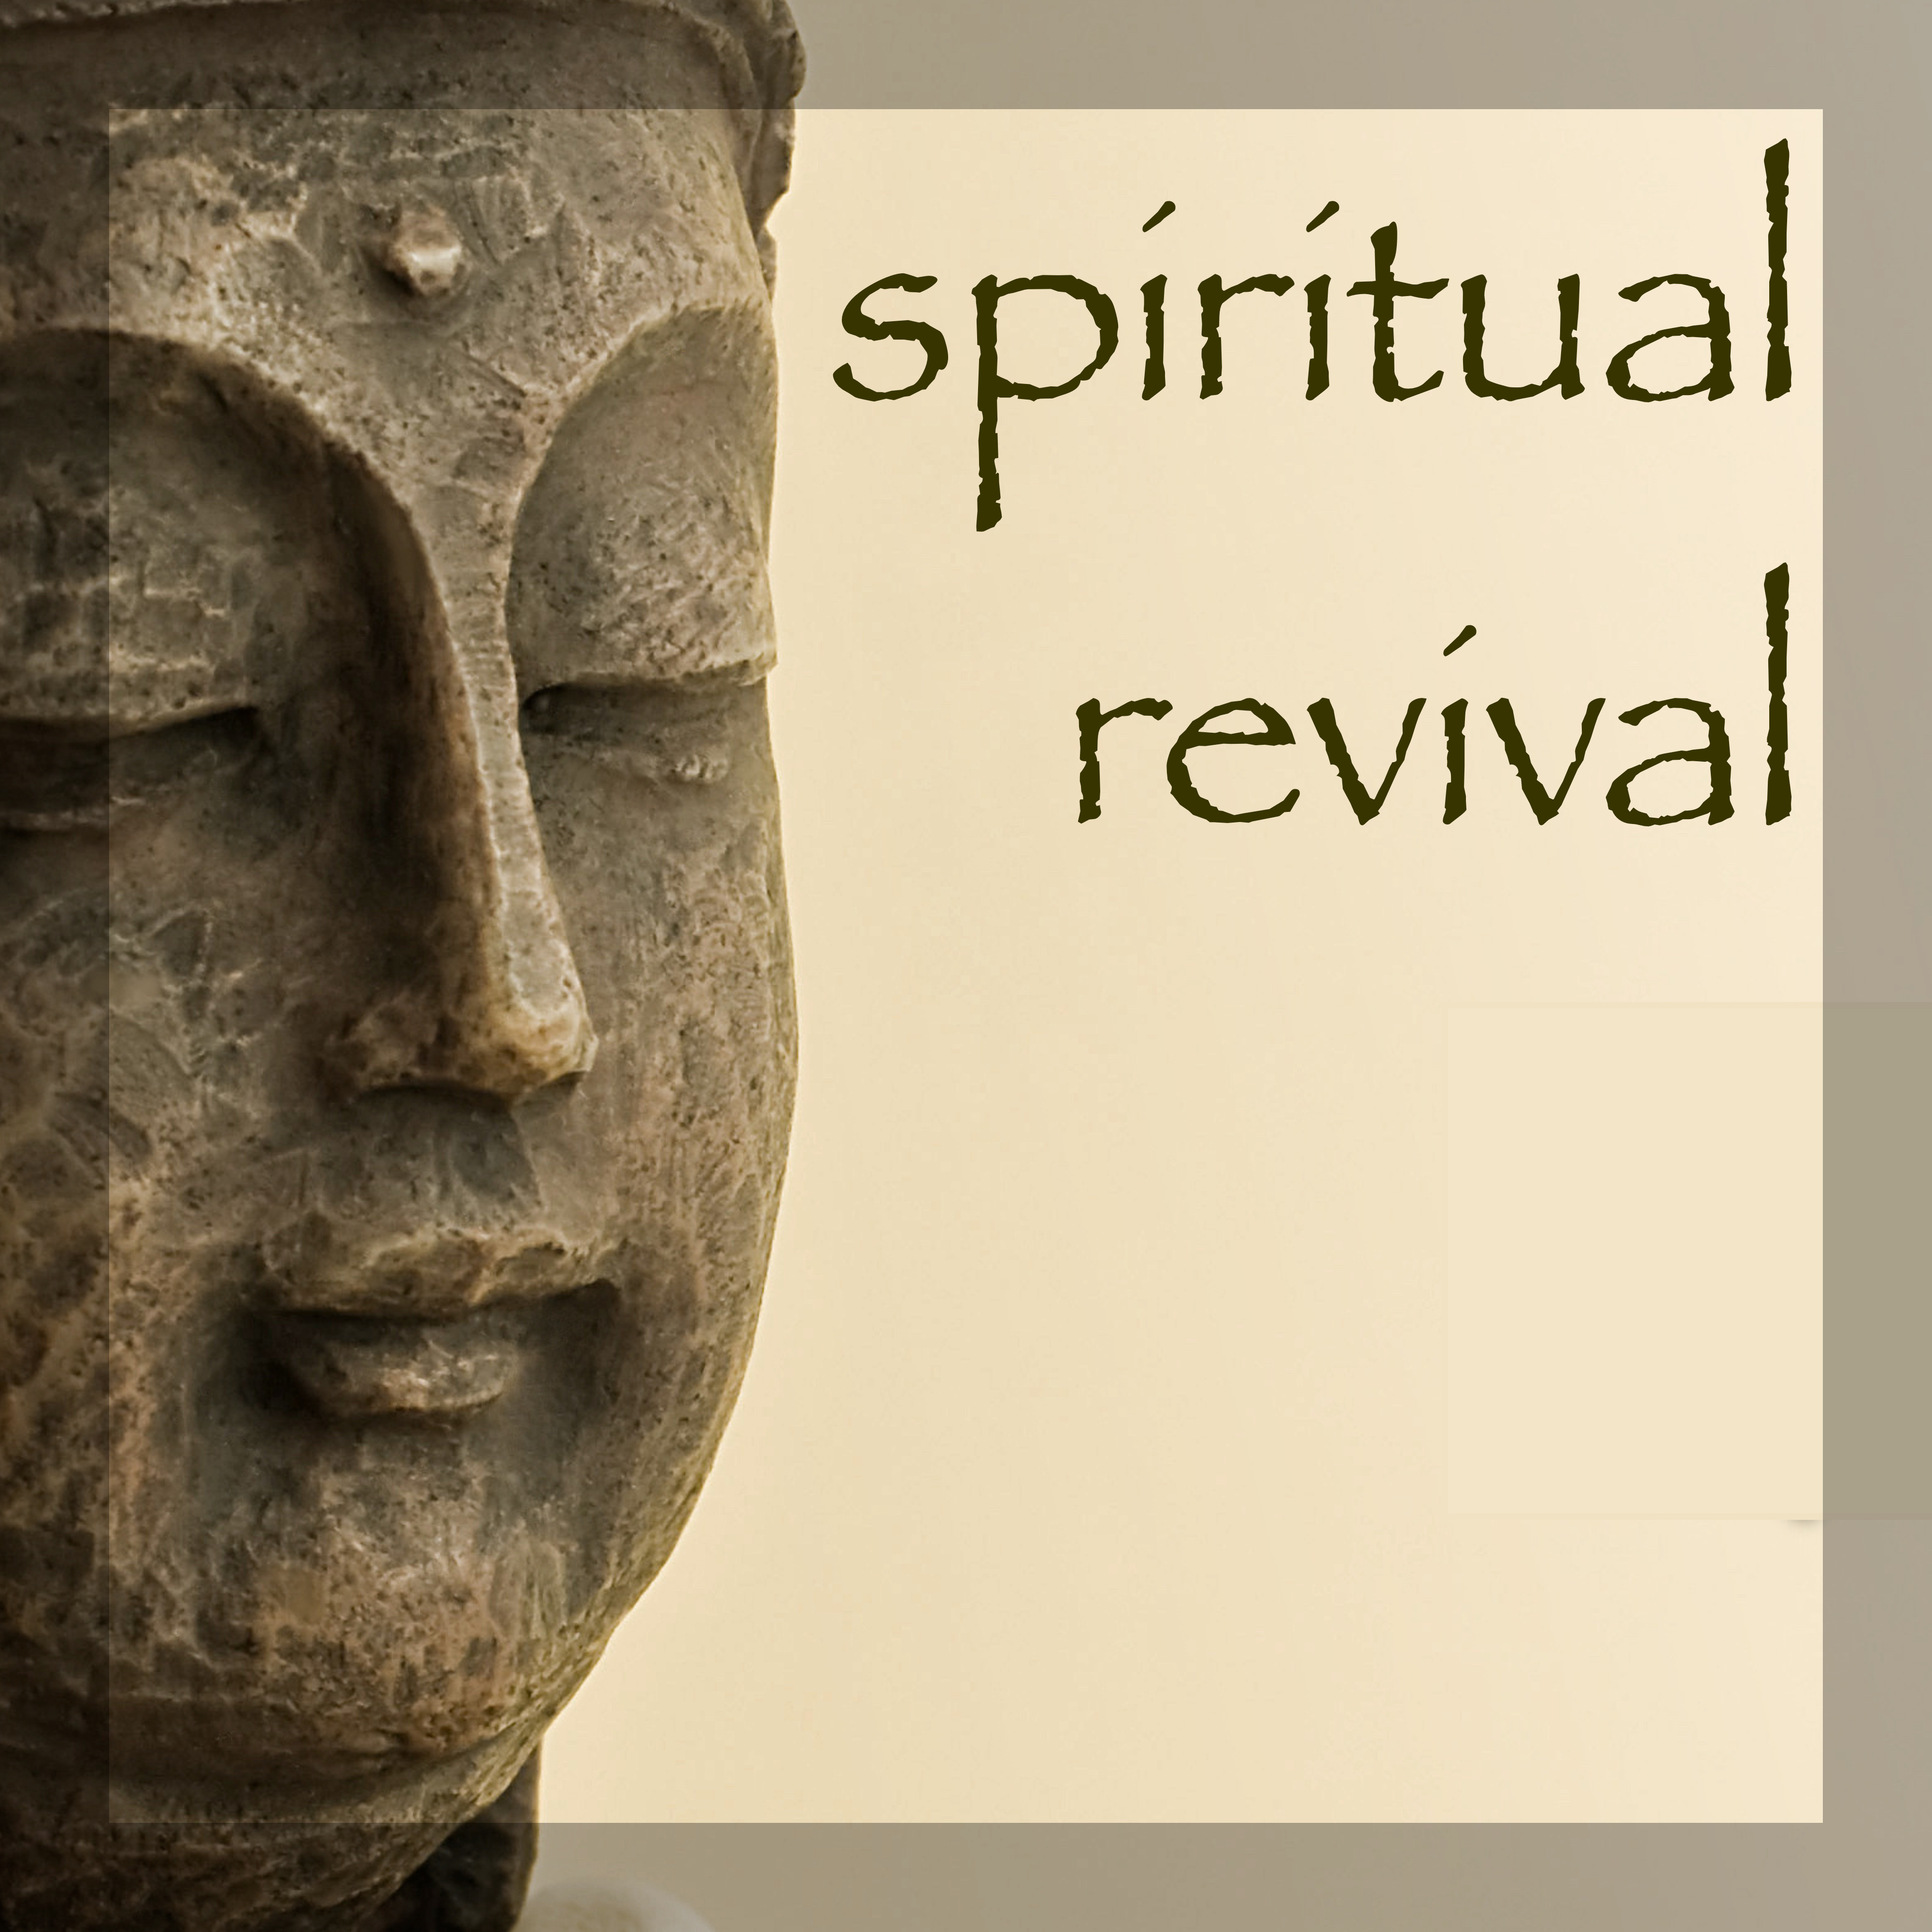 Spiritual Revival: Healing New Age Music for Soul and Mind, Calming Music for Deep Meditation & Relaxation to Rebirth